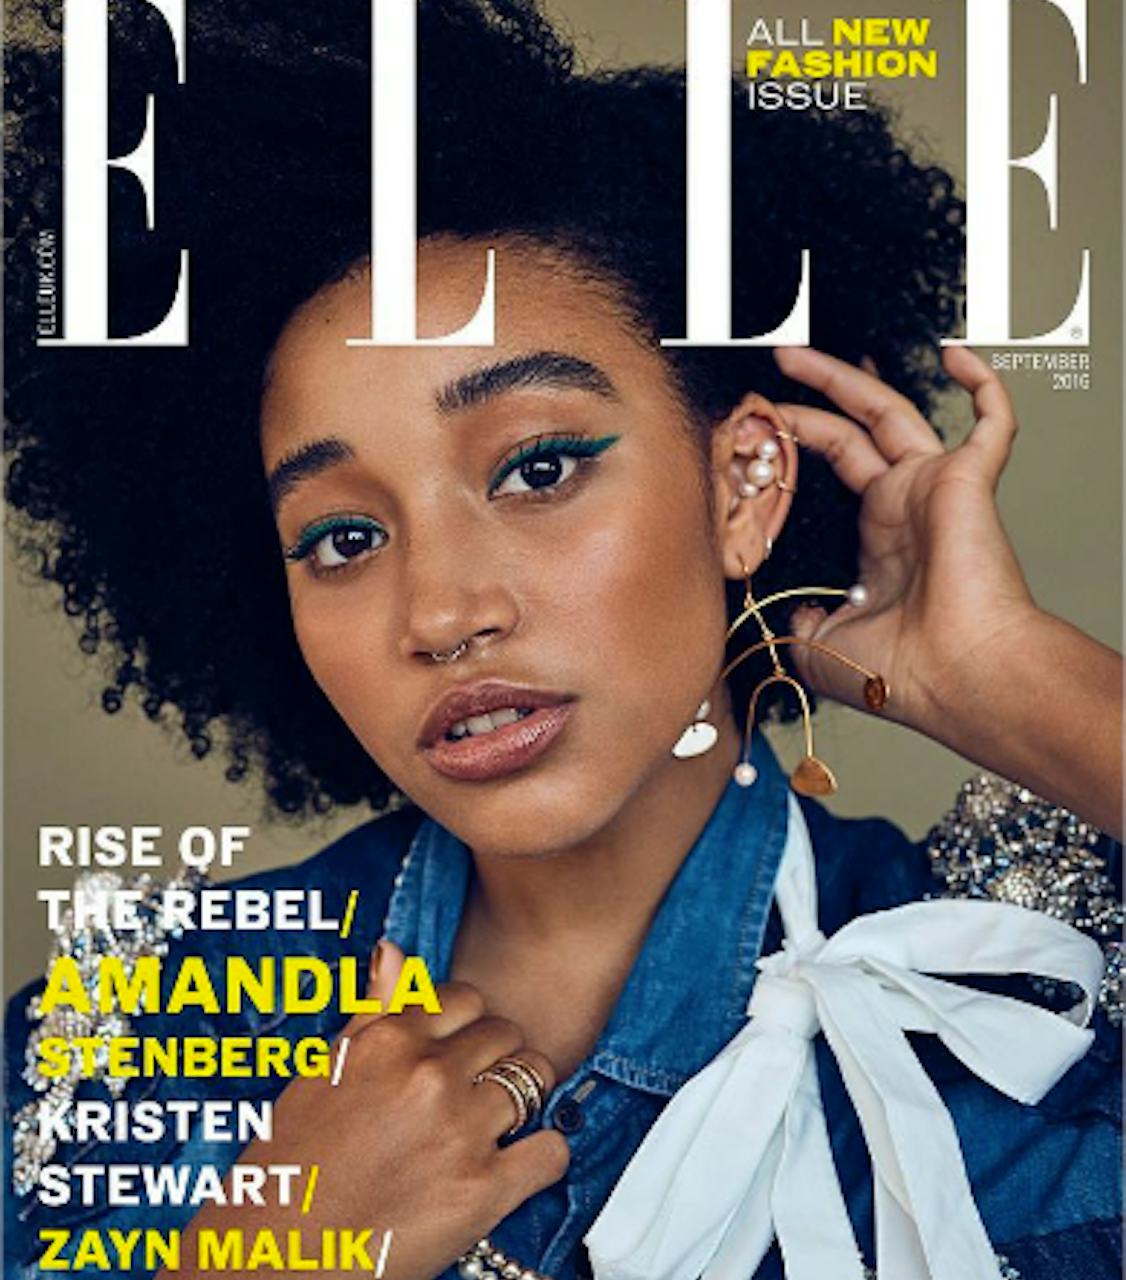 ELLE UK Features LGBTQ Celebrities On Their September Covers